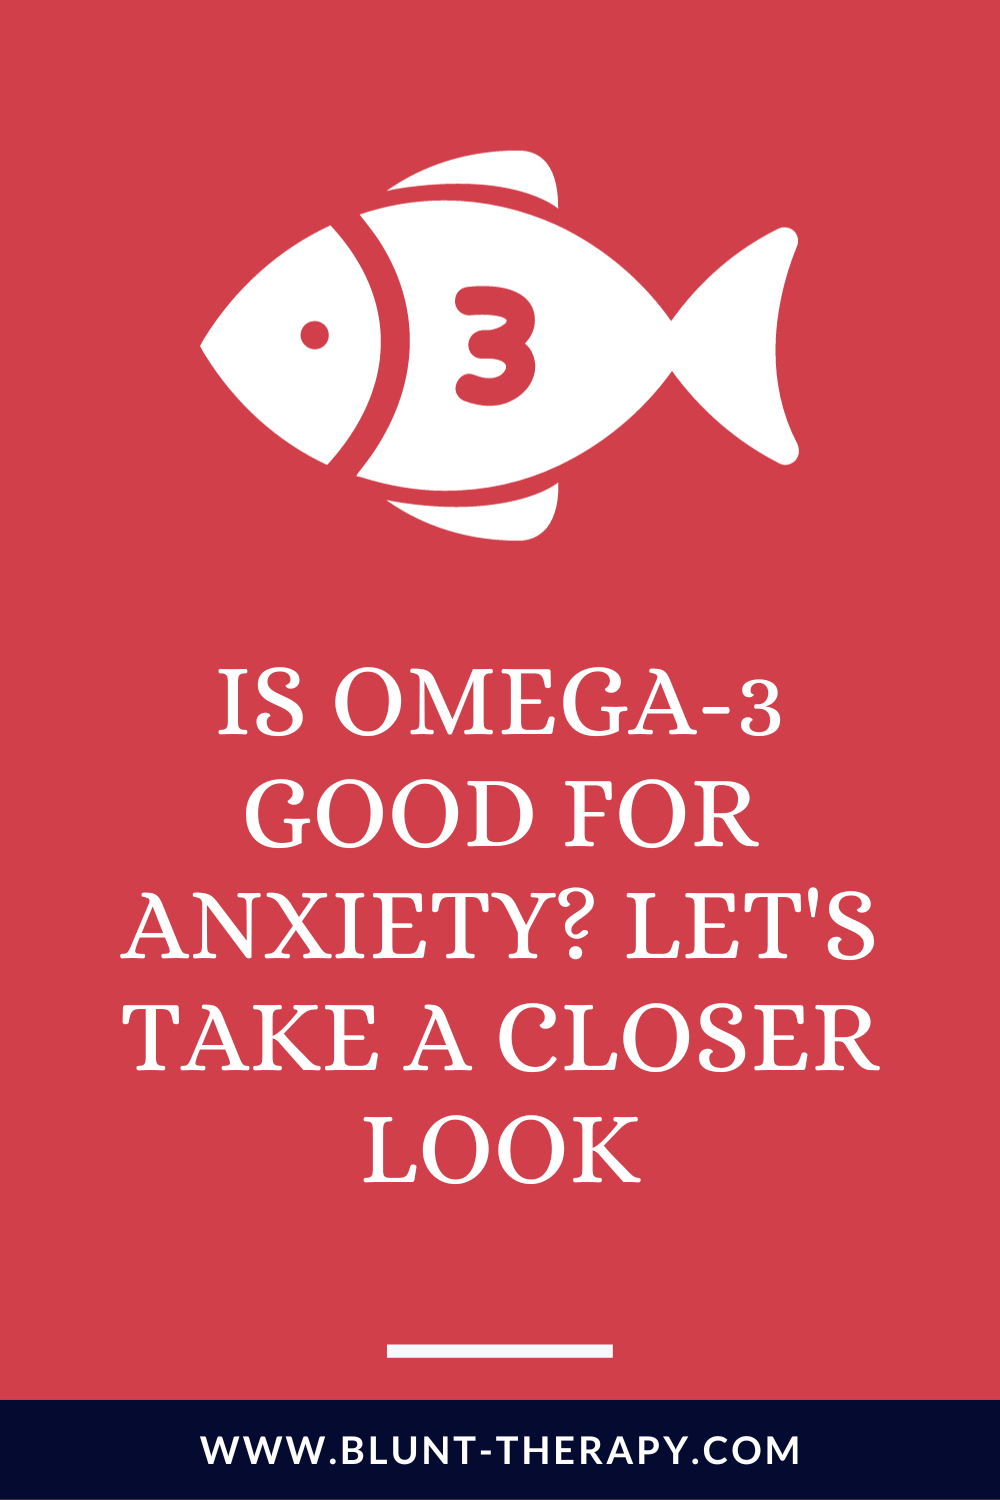 Is Omega-3 Good for Anxiety? Let's Take A Closer Look